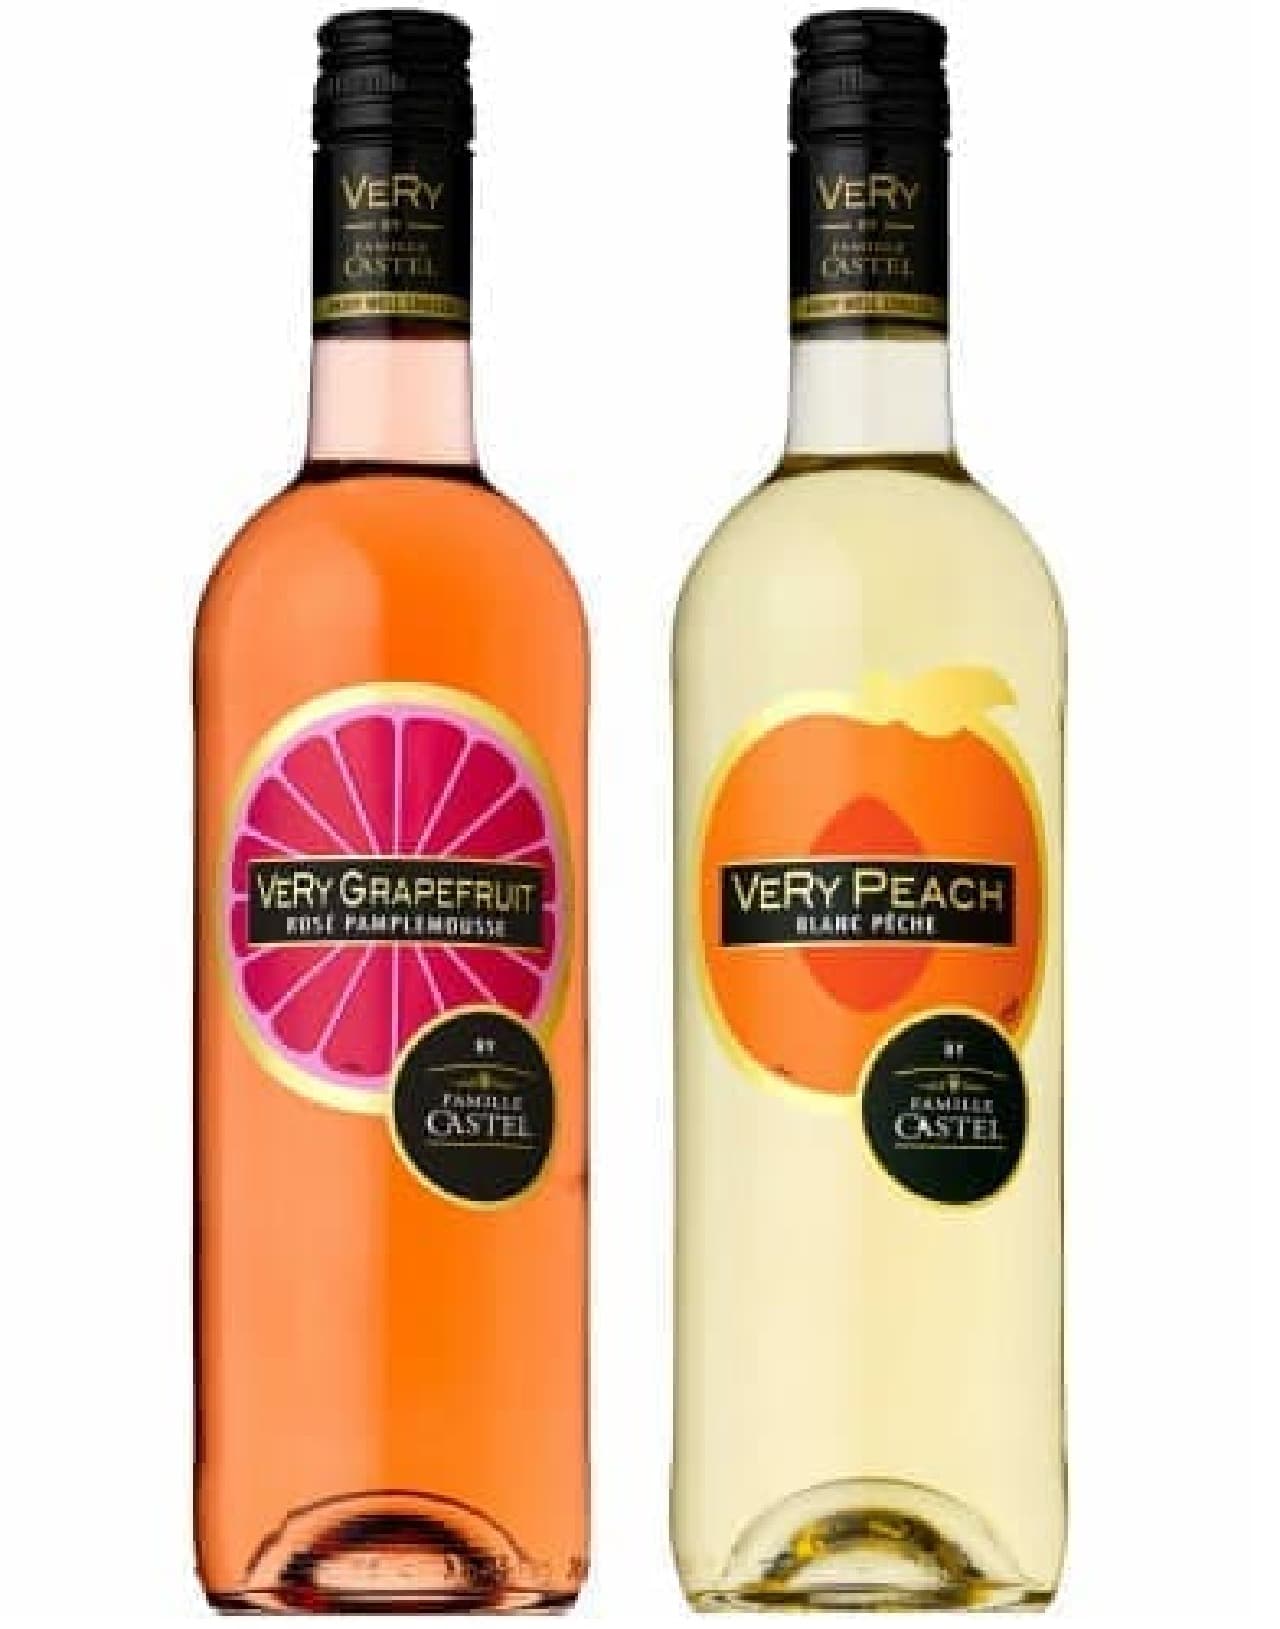 Flavored wine "VERY" is now available